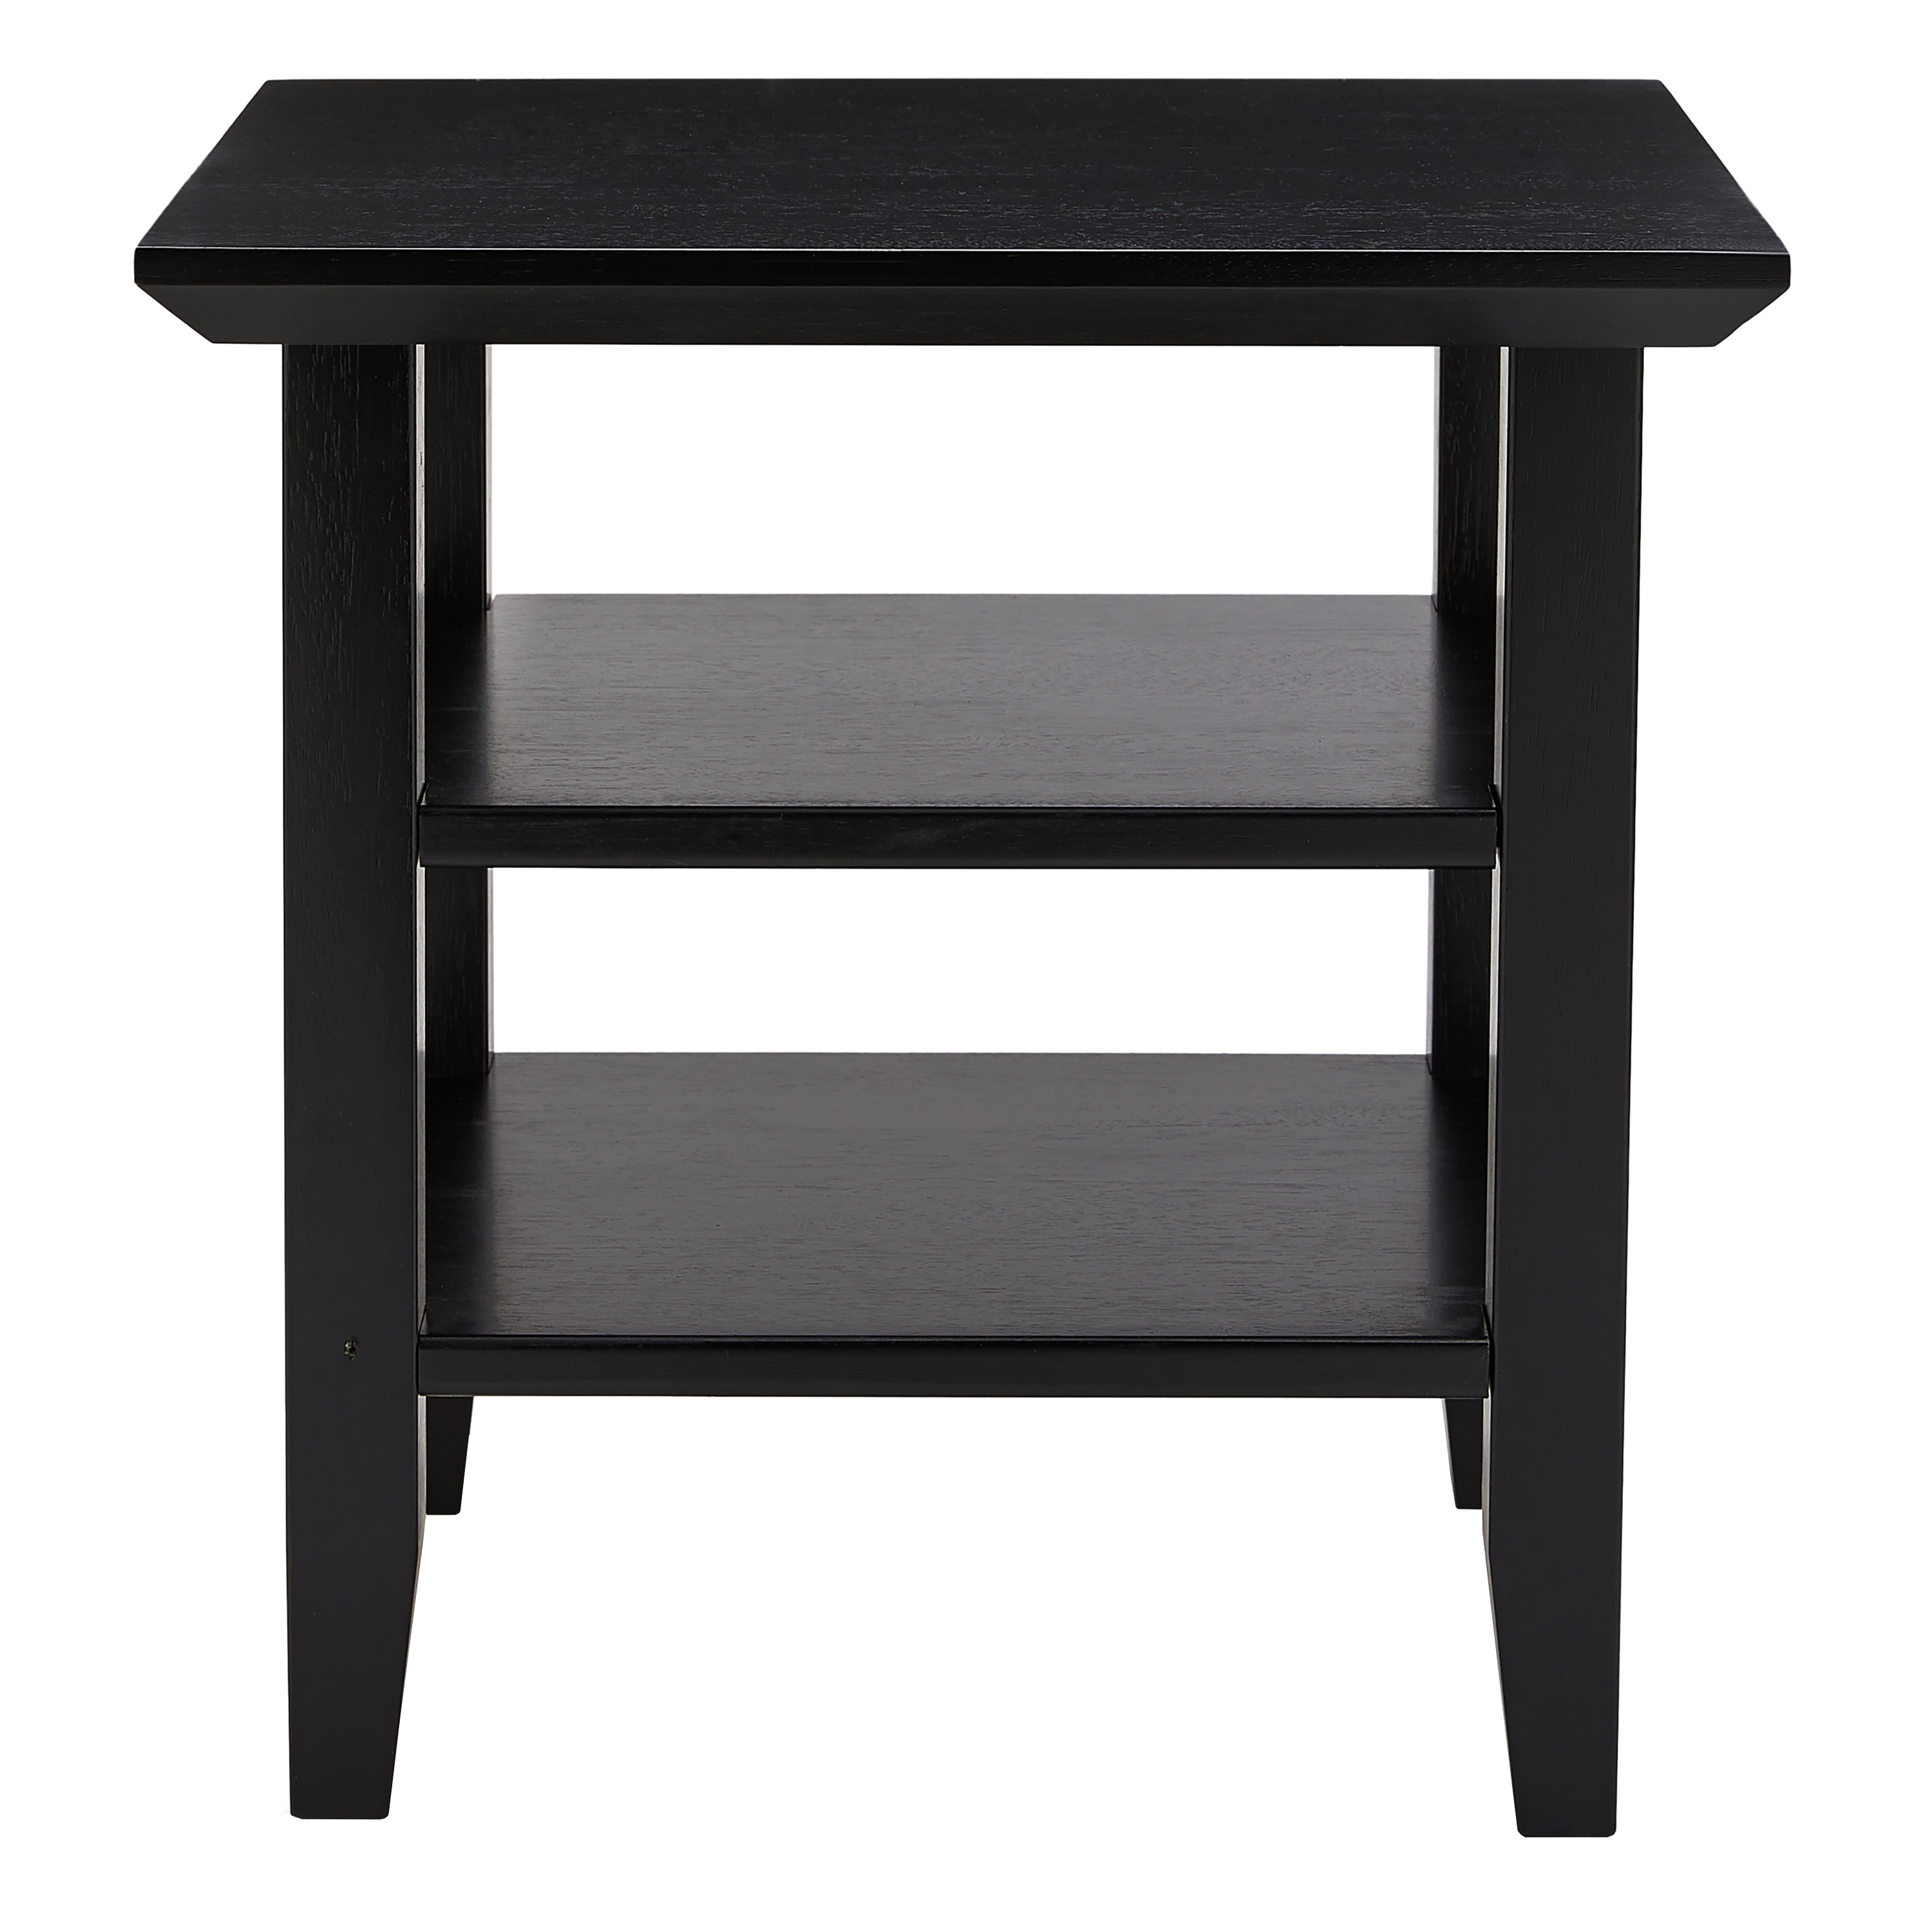 19 Inch Handcrafted Rubberwood Square Side End Table, 2 Shelves, Chamfered Legs, Black